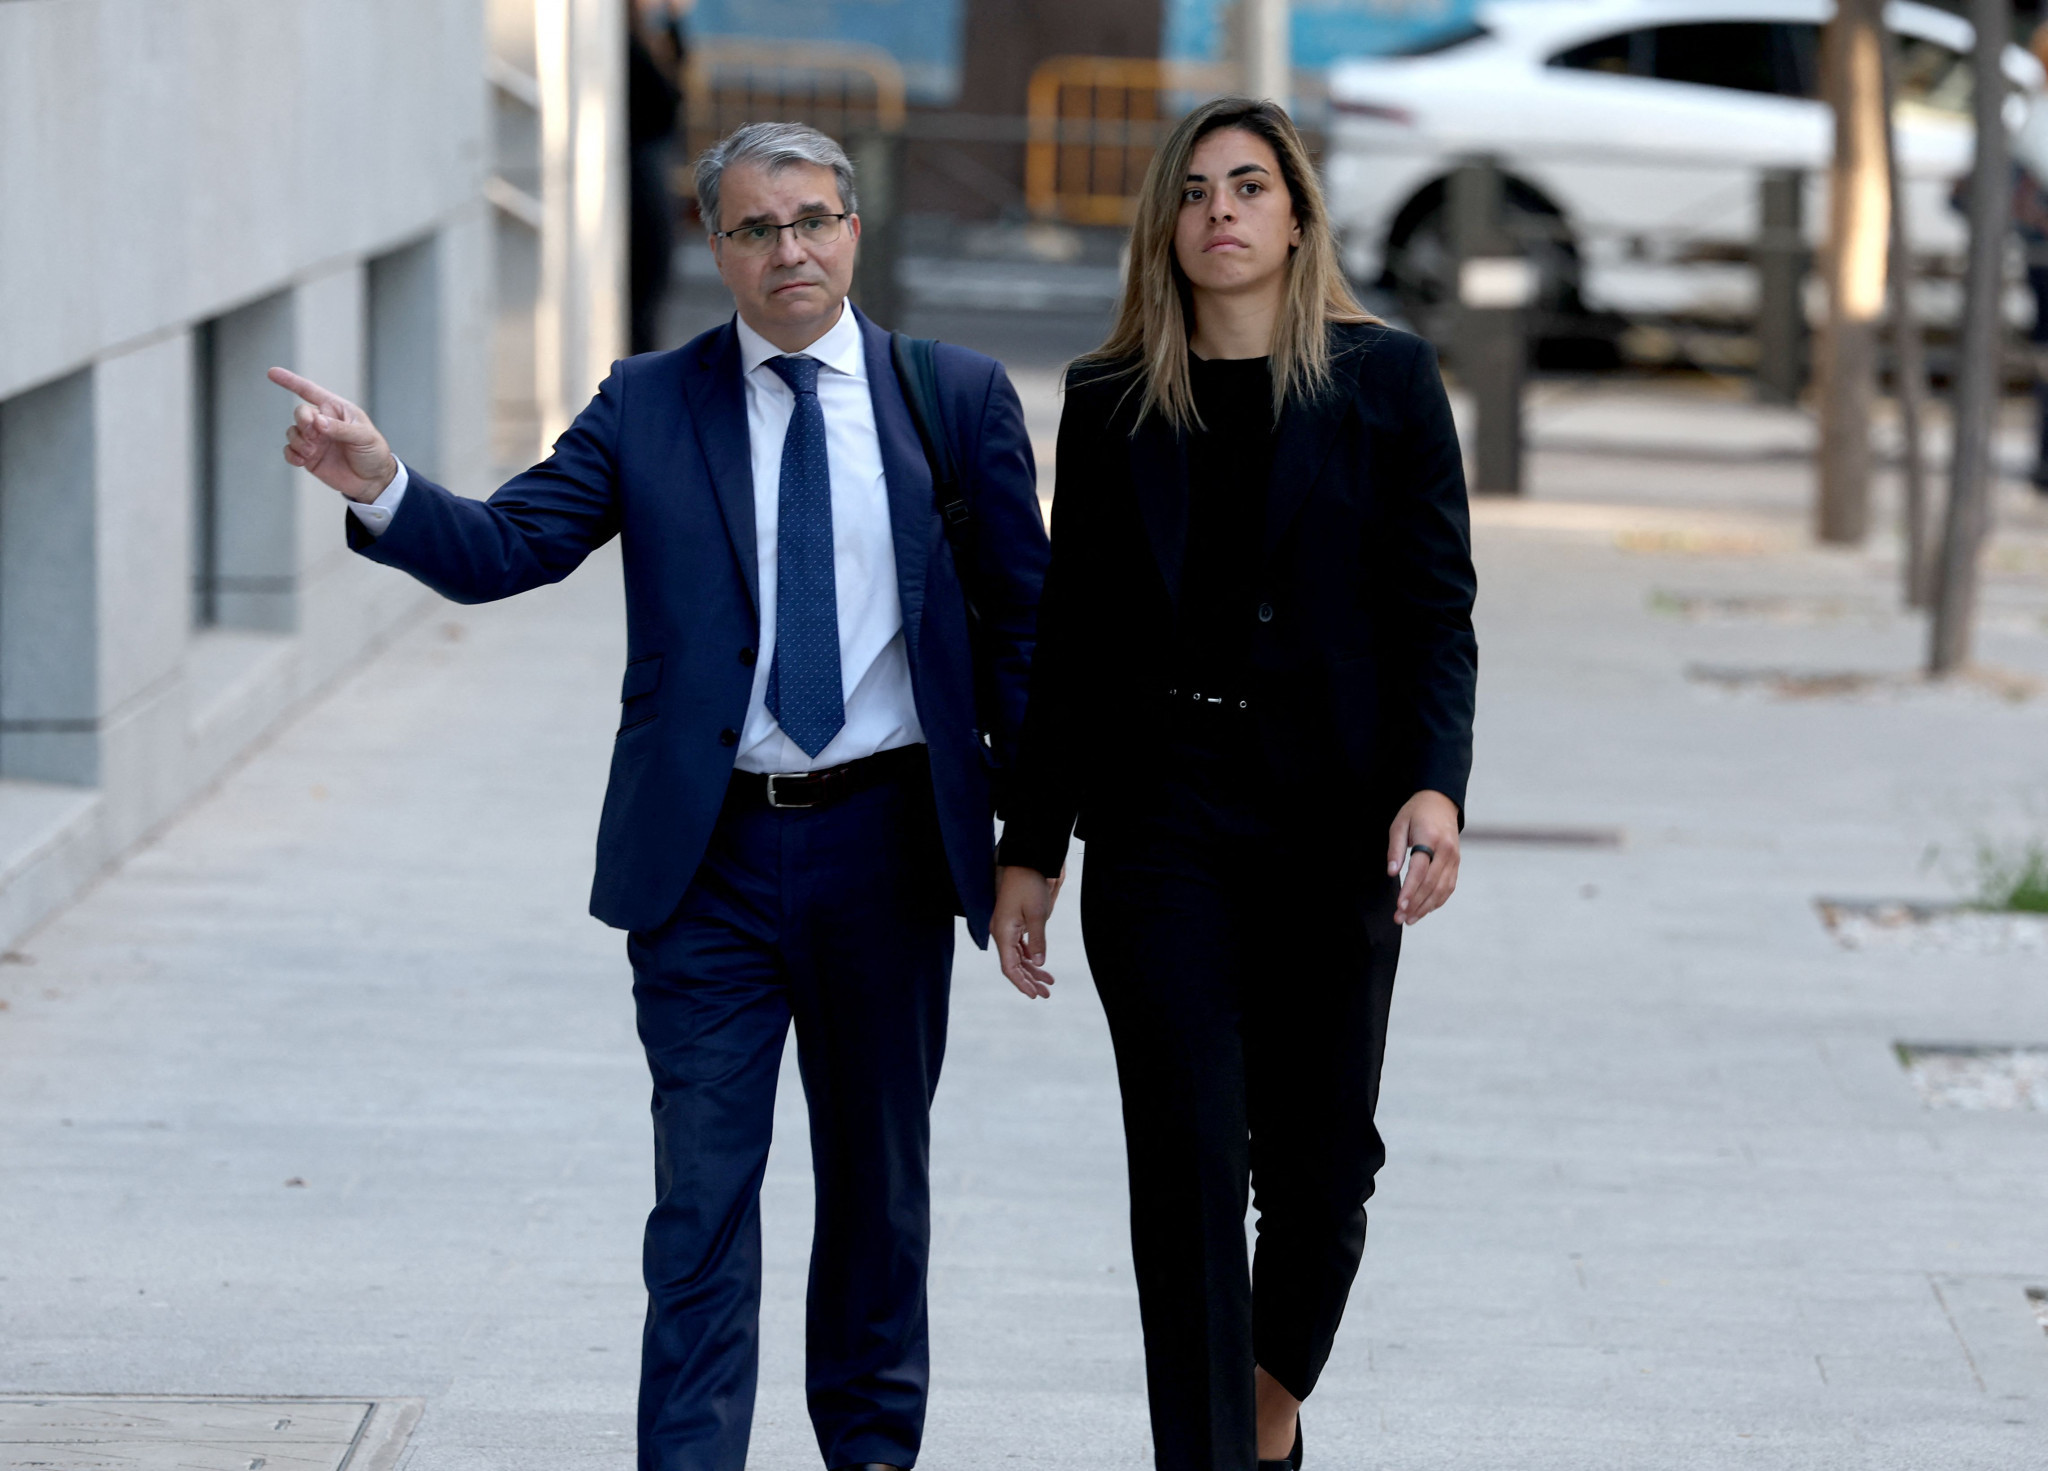 Misa Rodríguez leaves court in Madrid after testifying in the case against disgraced former RFEF President Luis Rubiales, who is accused of sexual assault and coercion ©Getty Images